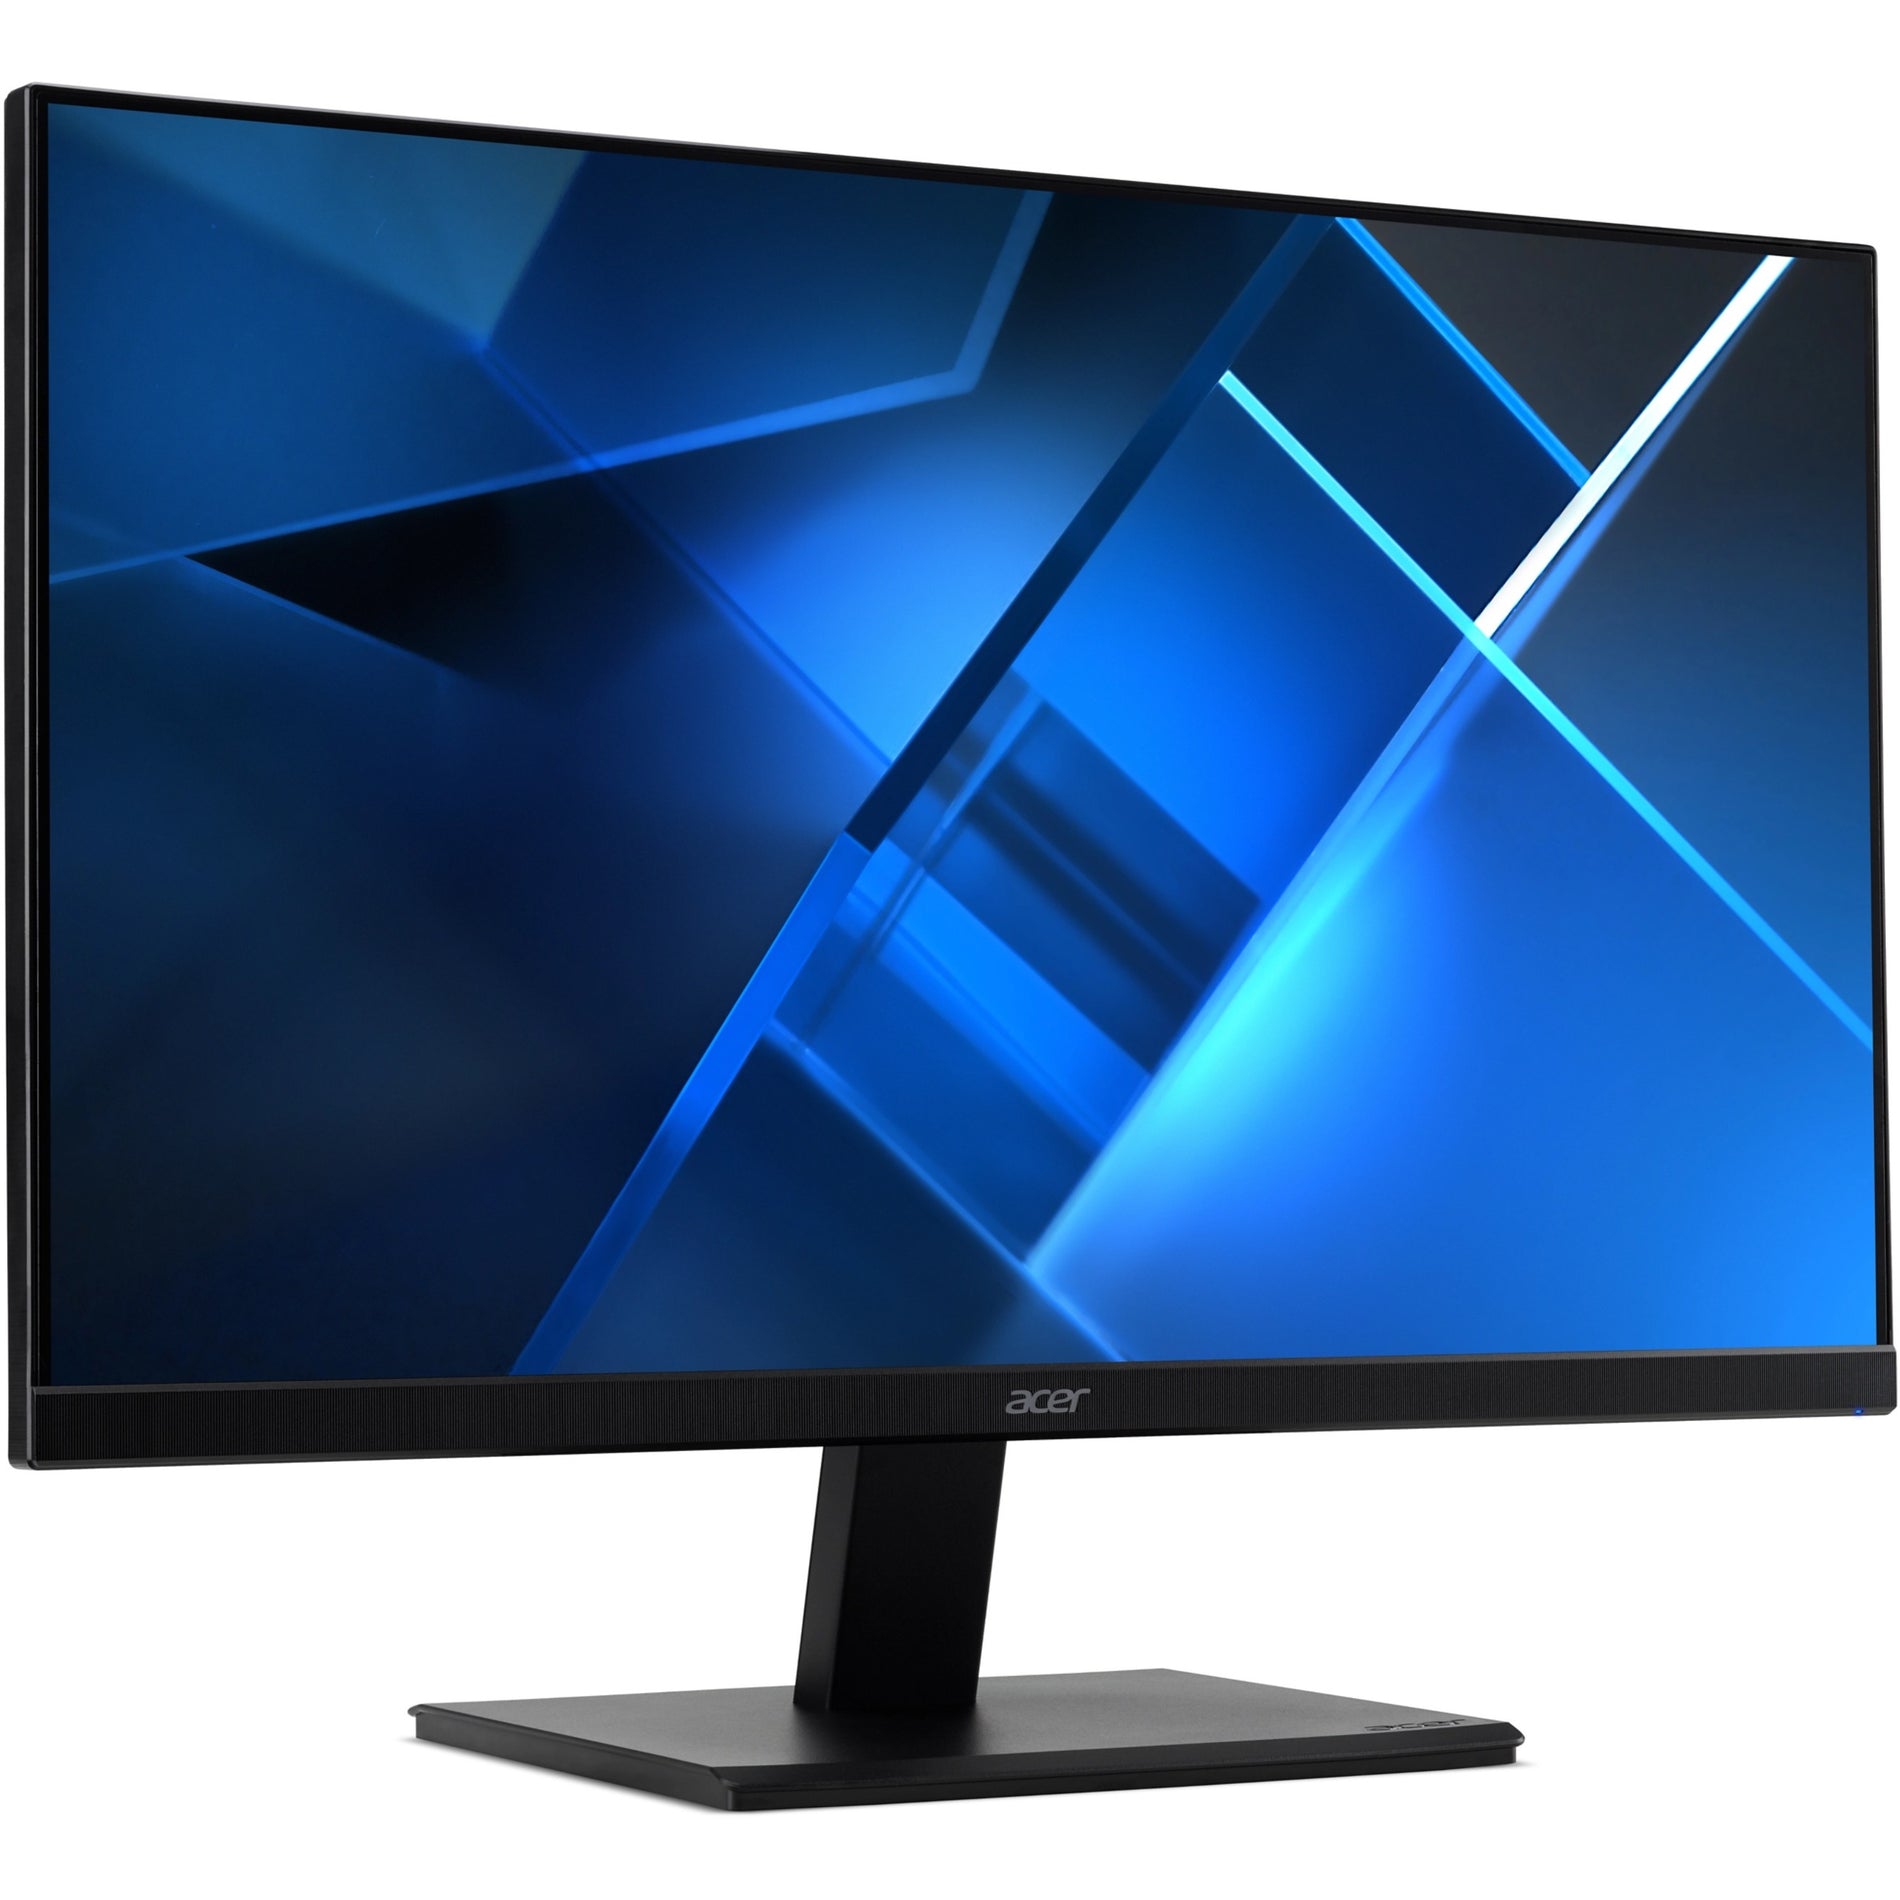 Acer UM.QV7AA.H02 V247Y H Widescreen LCD Monitor, 23.8", 4ms GTG, 250 Nit, FreeSync